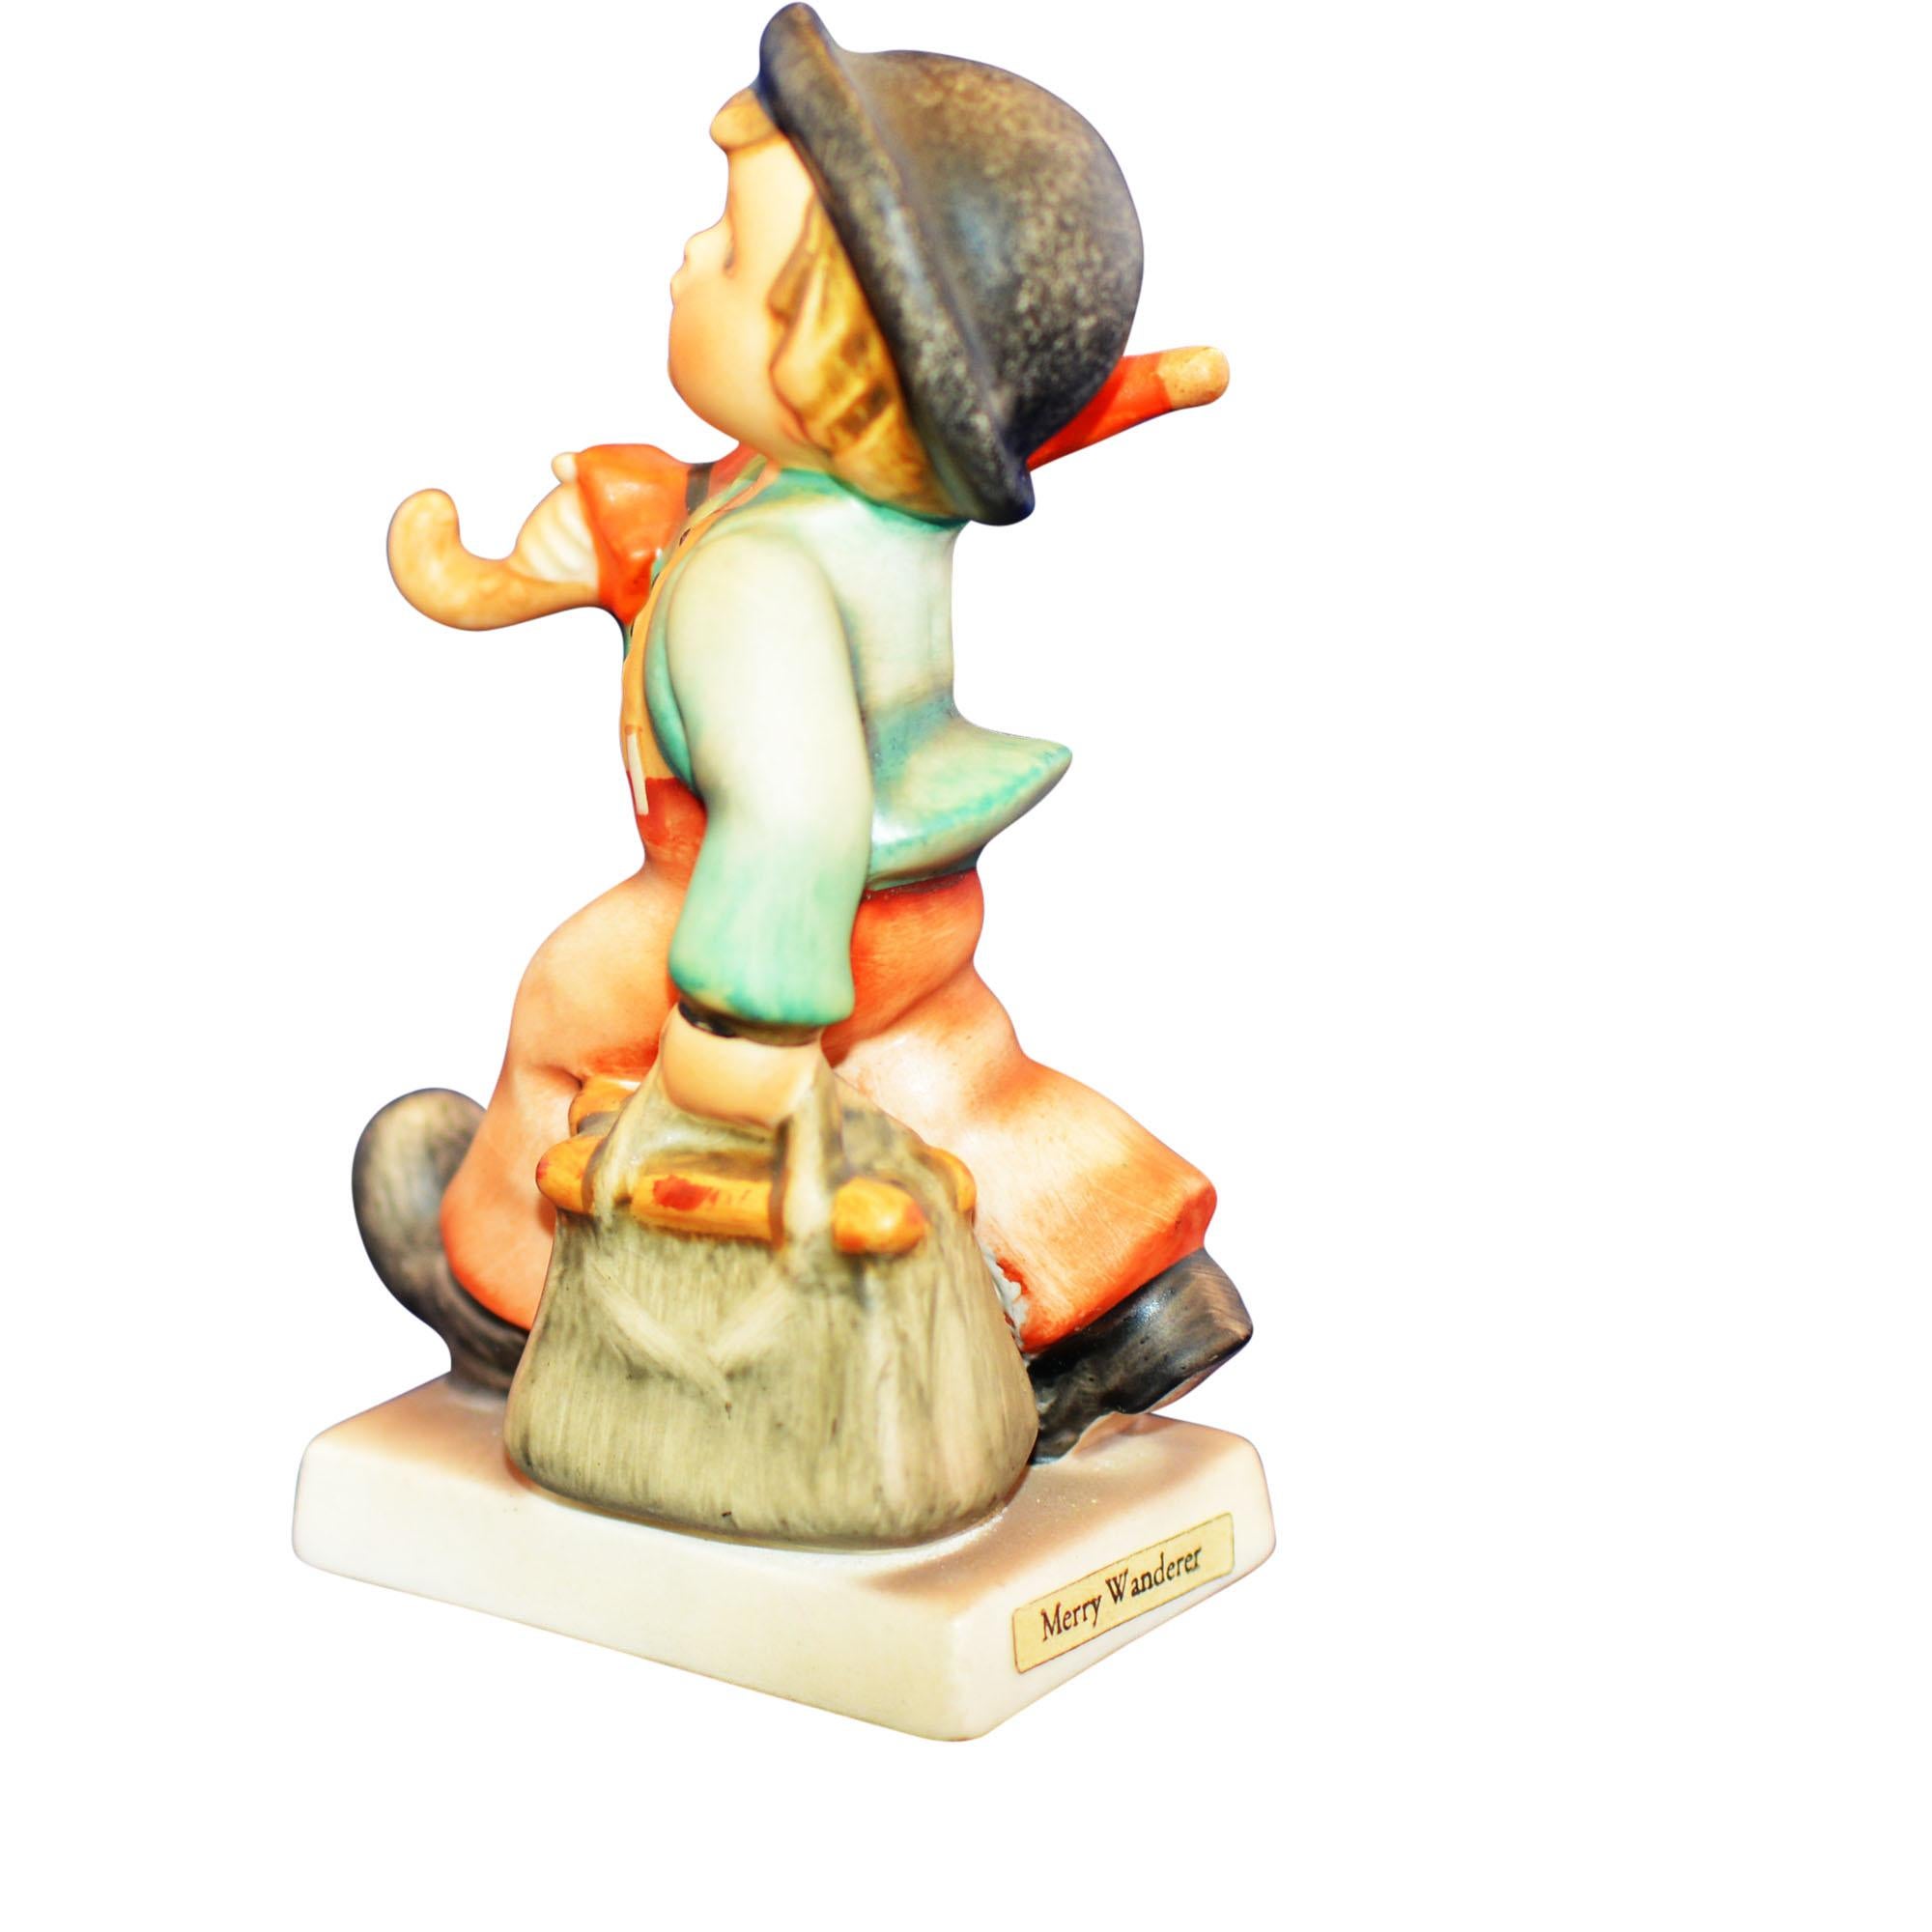 Hummel Merry Wanderer Figurine In Good Condition For Sale In Pataskala, OH